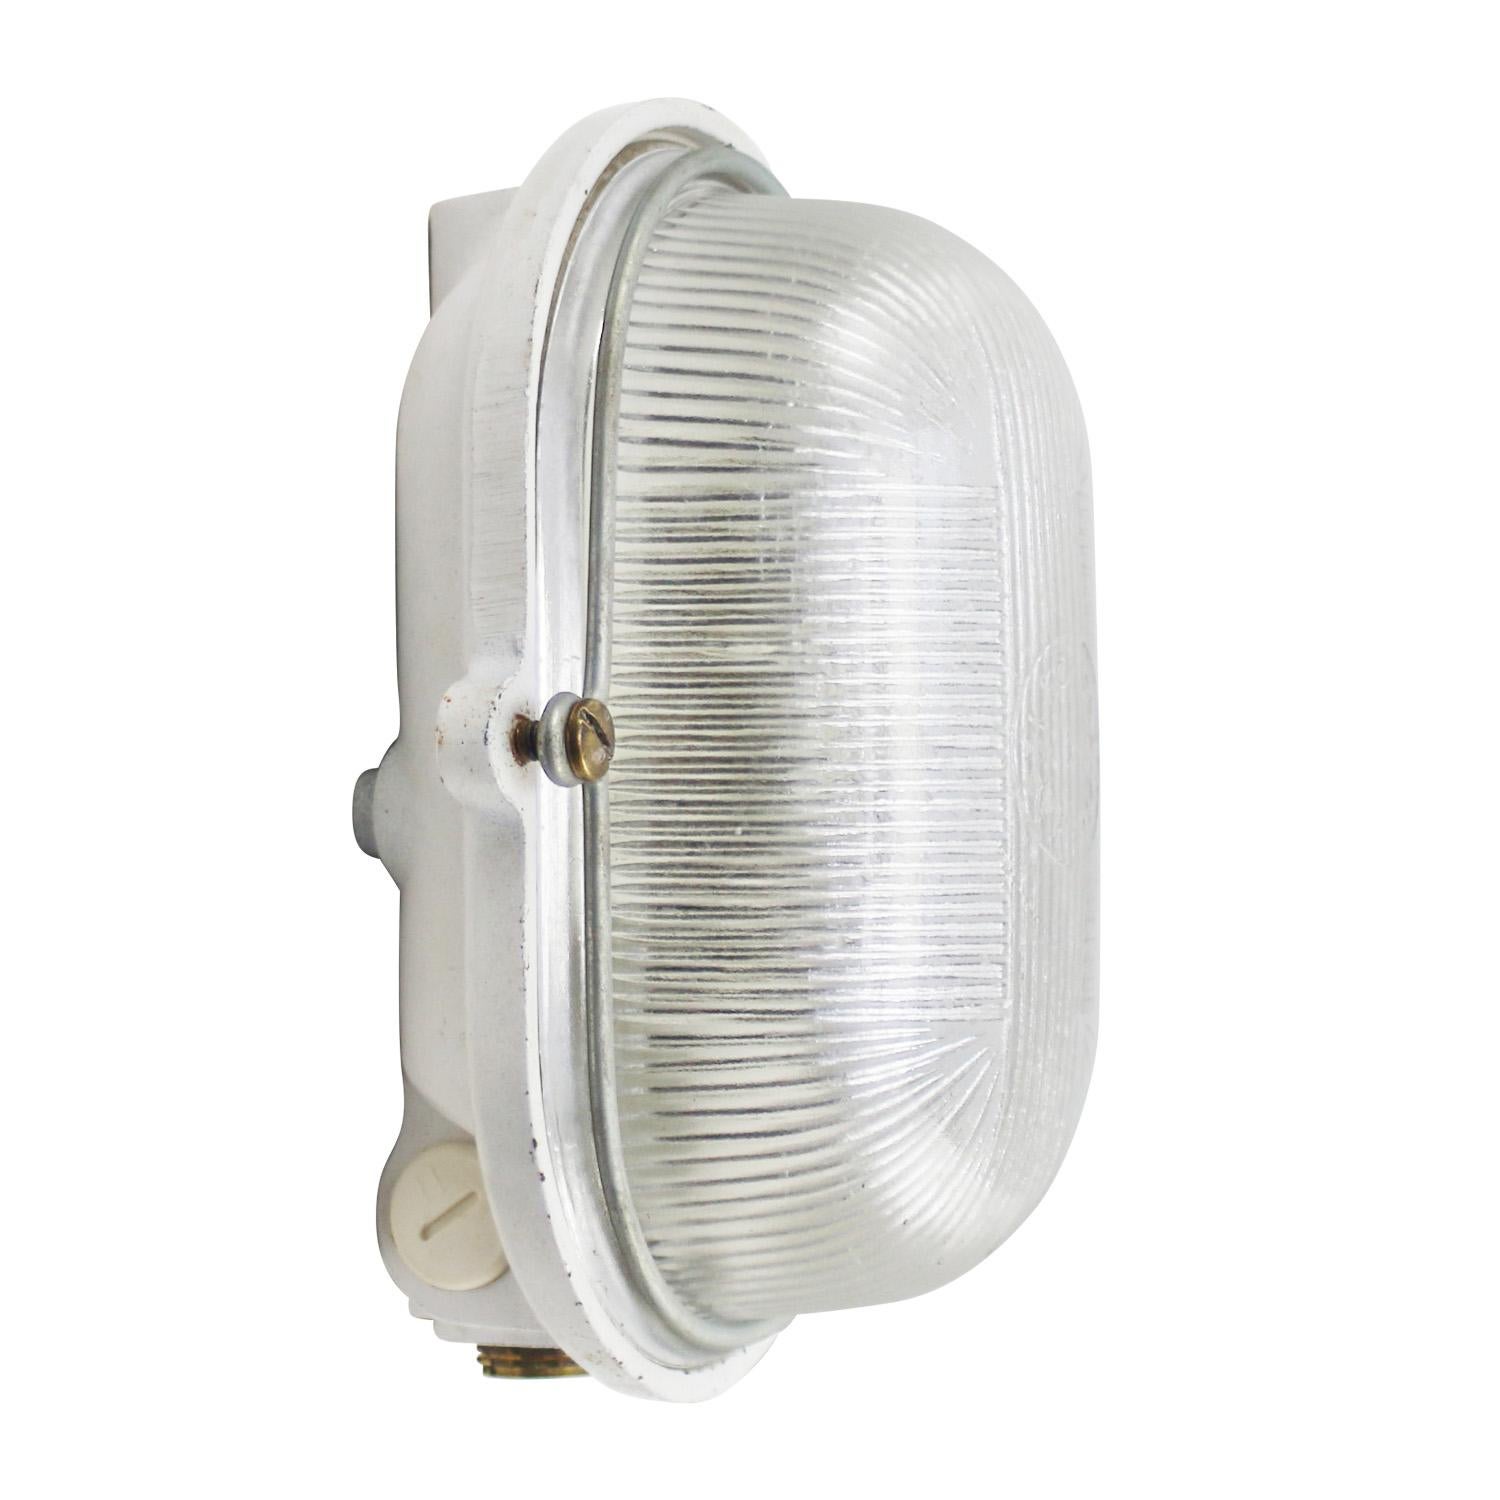 French Industrial wall / ceiling lamp by Mapelec, Amiens, France
Cast Iron back with clear striped glass.

Weight 1.80 kg / 4 lb

Priced per individual item. All lamps have been made suitable by international standards for incandescent light bulbs,